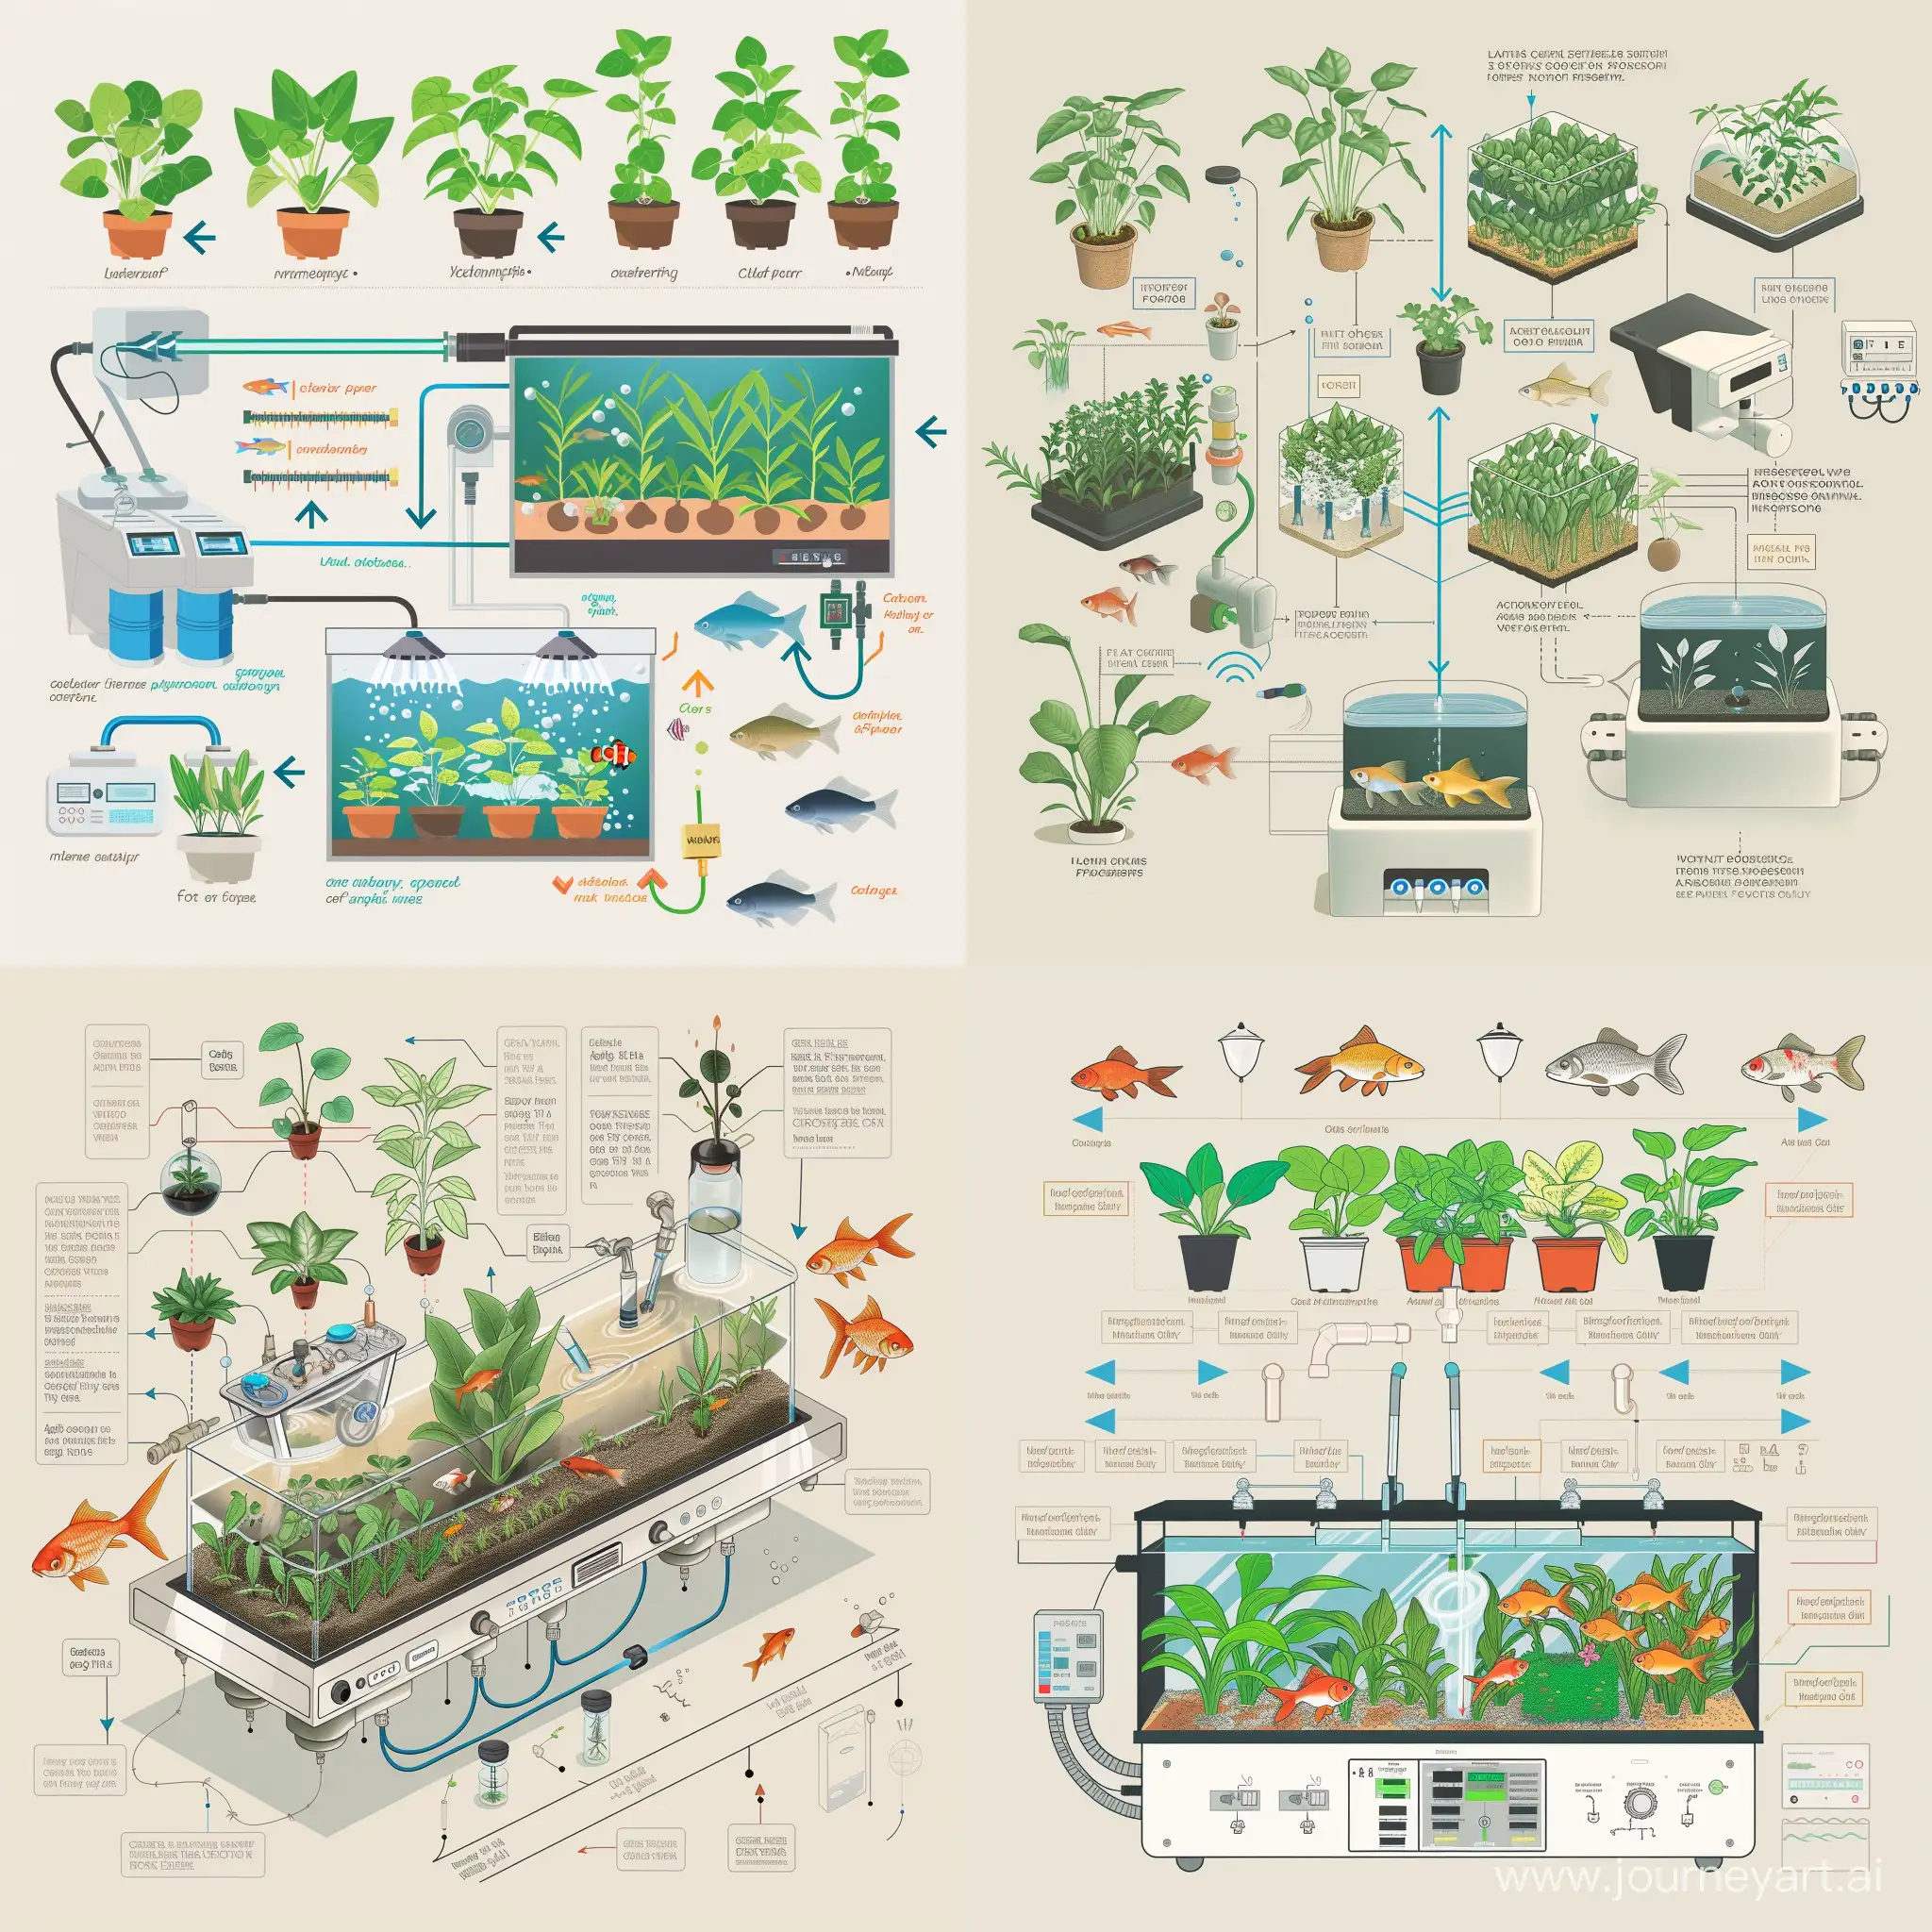 **Image:** A detailed illustration of a hydroponic system with various components labeled for clarity.  **Labels:**  * **Plants:** Include diverse varieties of plants growing at different stages, representing different genders and ethnicities (e.g., leafy greens, herbs, small fruiting plants). * **Fish tank:** Clearly labeled with fish of various sizes and colors (e.g., goldfish, guppies, tetras). * **Grow lights:** Depicted as bright, energy-efficient lights positioned strategically above the plants. * **Water pump:** Shown circulating water through pipes or channels towards the plants and fish tank. * **Nutrient reservoir:** Labeled and visible, containing a balanced nutrient solution for the plants. * **Filter:** Illustrated as a component cleaning the water in the fish tank. * **Control panel:** Optional, but if included, show it displaying system settings.  **Arrows:** Use blue arrows to illustrate the flow of clean water from the reservoir to the plants and fish tank. Use green arrows to depict the flow of nutrient-rich water back to the reservoir.  **Background:** Choose a neutral background color like light grey or beige to make the labeled components stand out.  **Additional details:**  * Ensure the plants and fish are drawn to scale for a realistic representation. * Consider adding subtle textures to different components for visual interest. * Maintain a clean and uncluttered composition for easy understanding. *do not add unreadable writing
